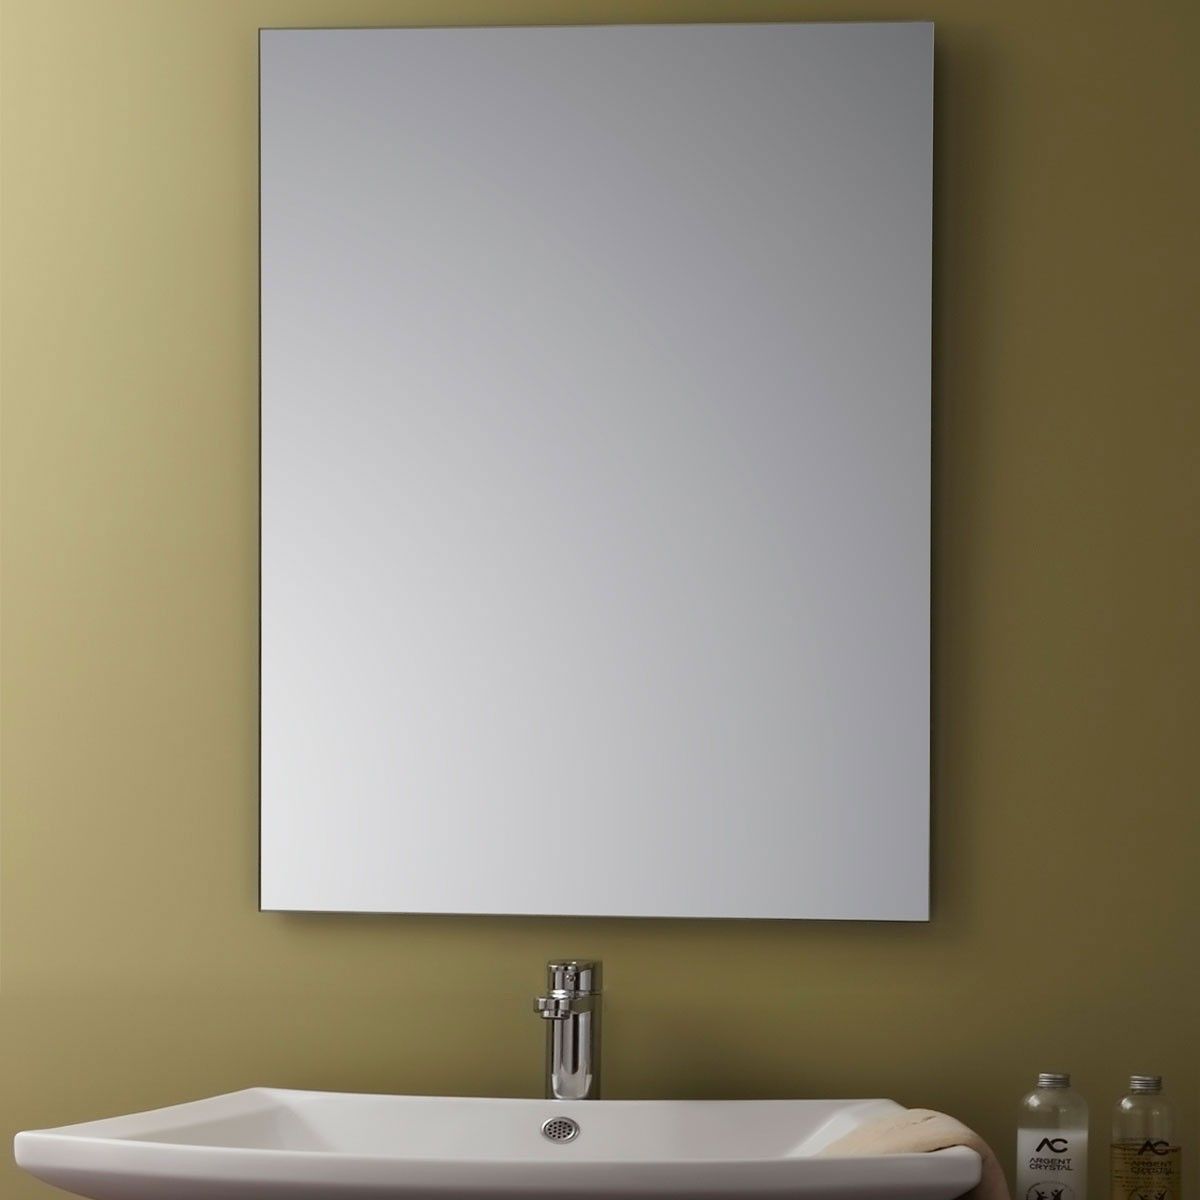 Unframed Bathroom Silvered Mirror - Reversible and Flat Polished Edge/24 Inch x 32 Inch (YJ-388H)